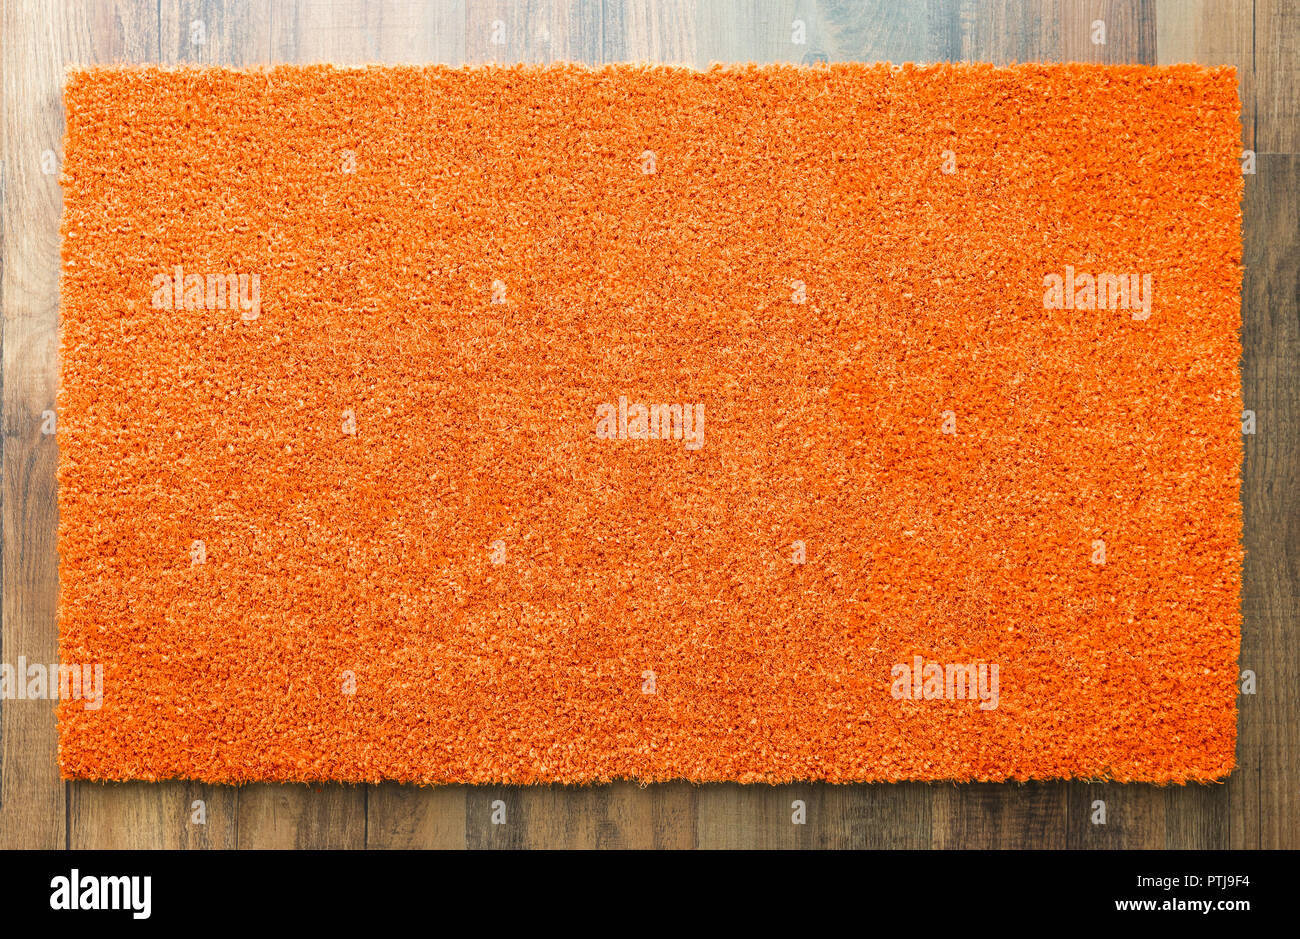 Blank Orange Welcome Mat On Wood Floor Background Ready For Your Own Text. Stock Photo